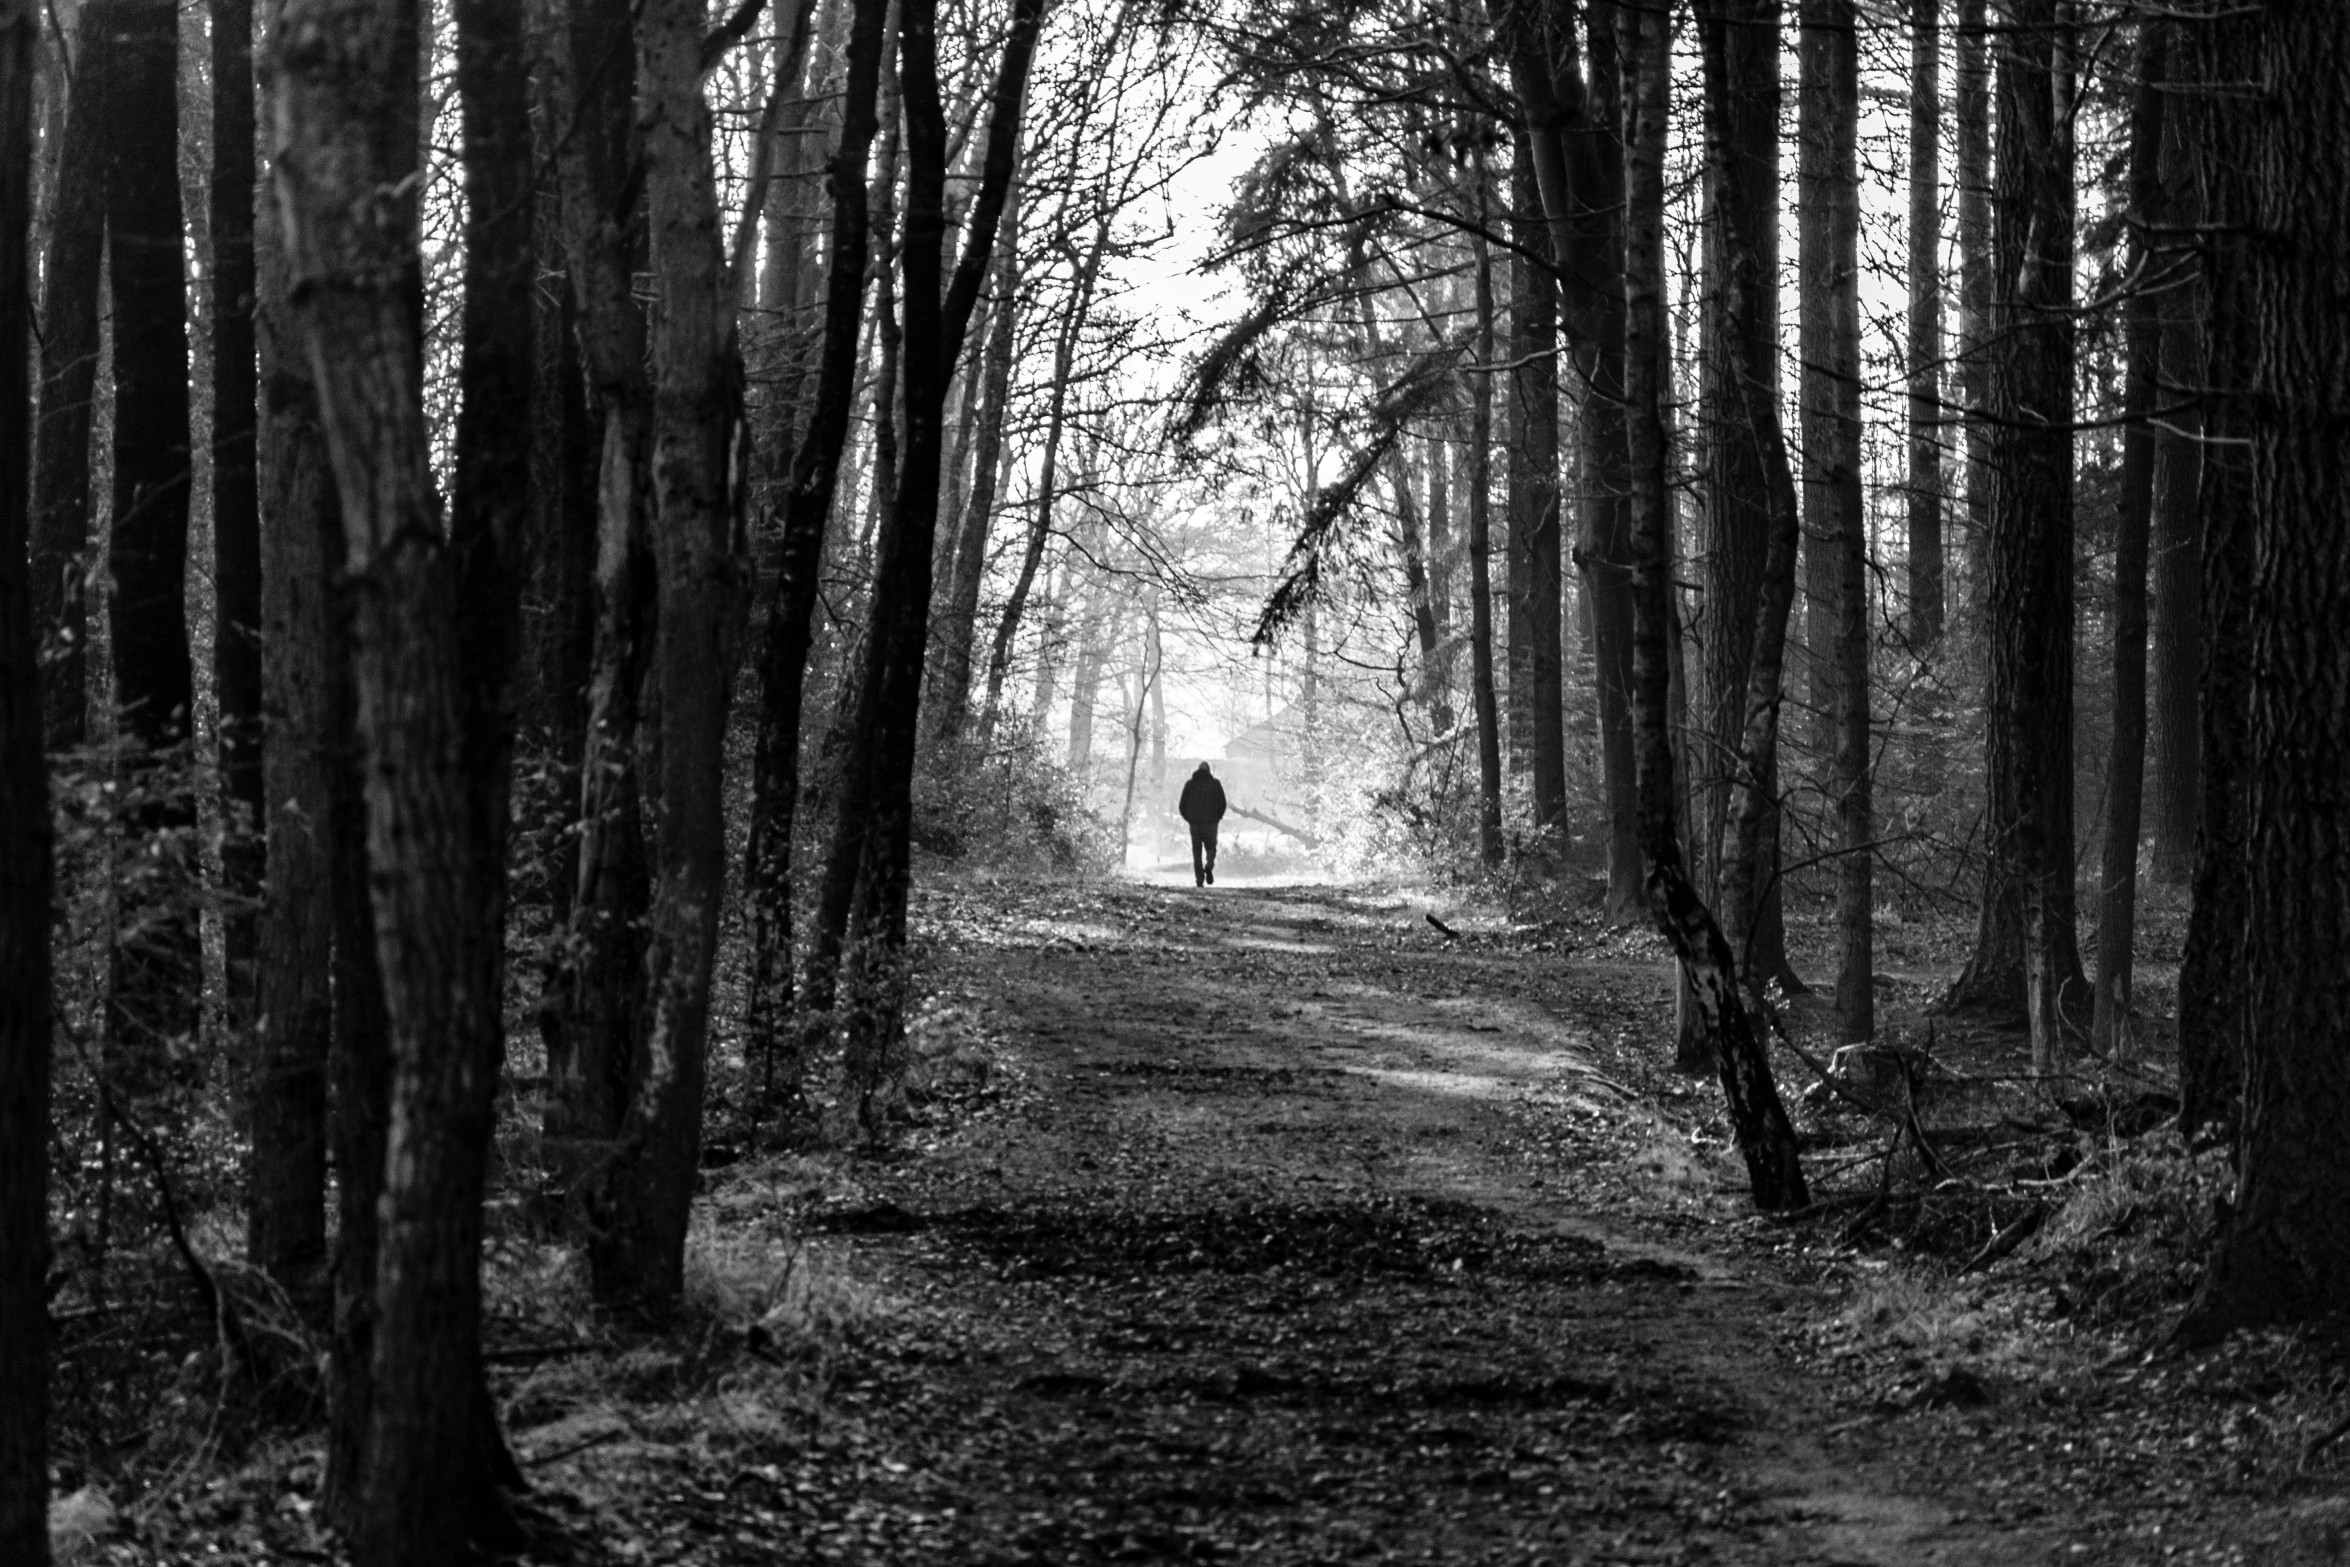 a person stands alone in a wooded area